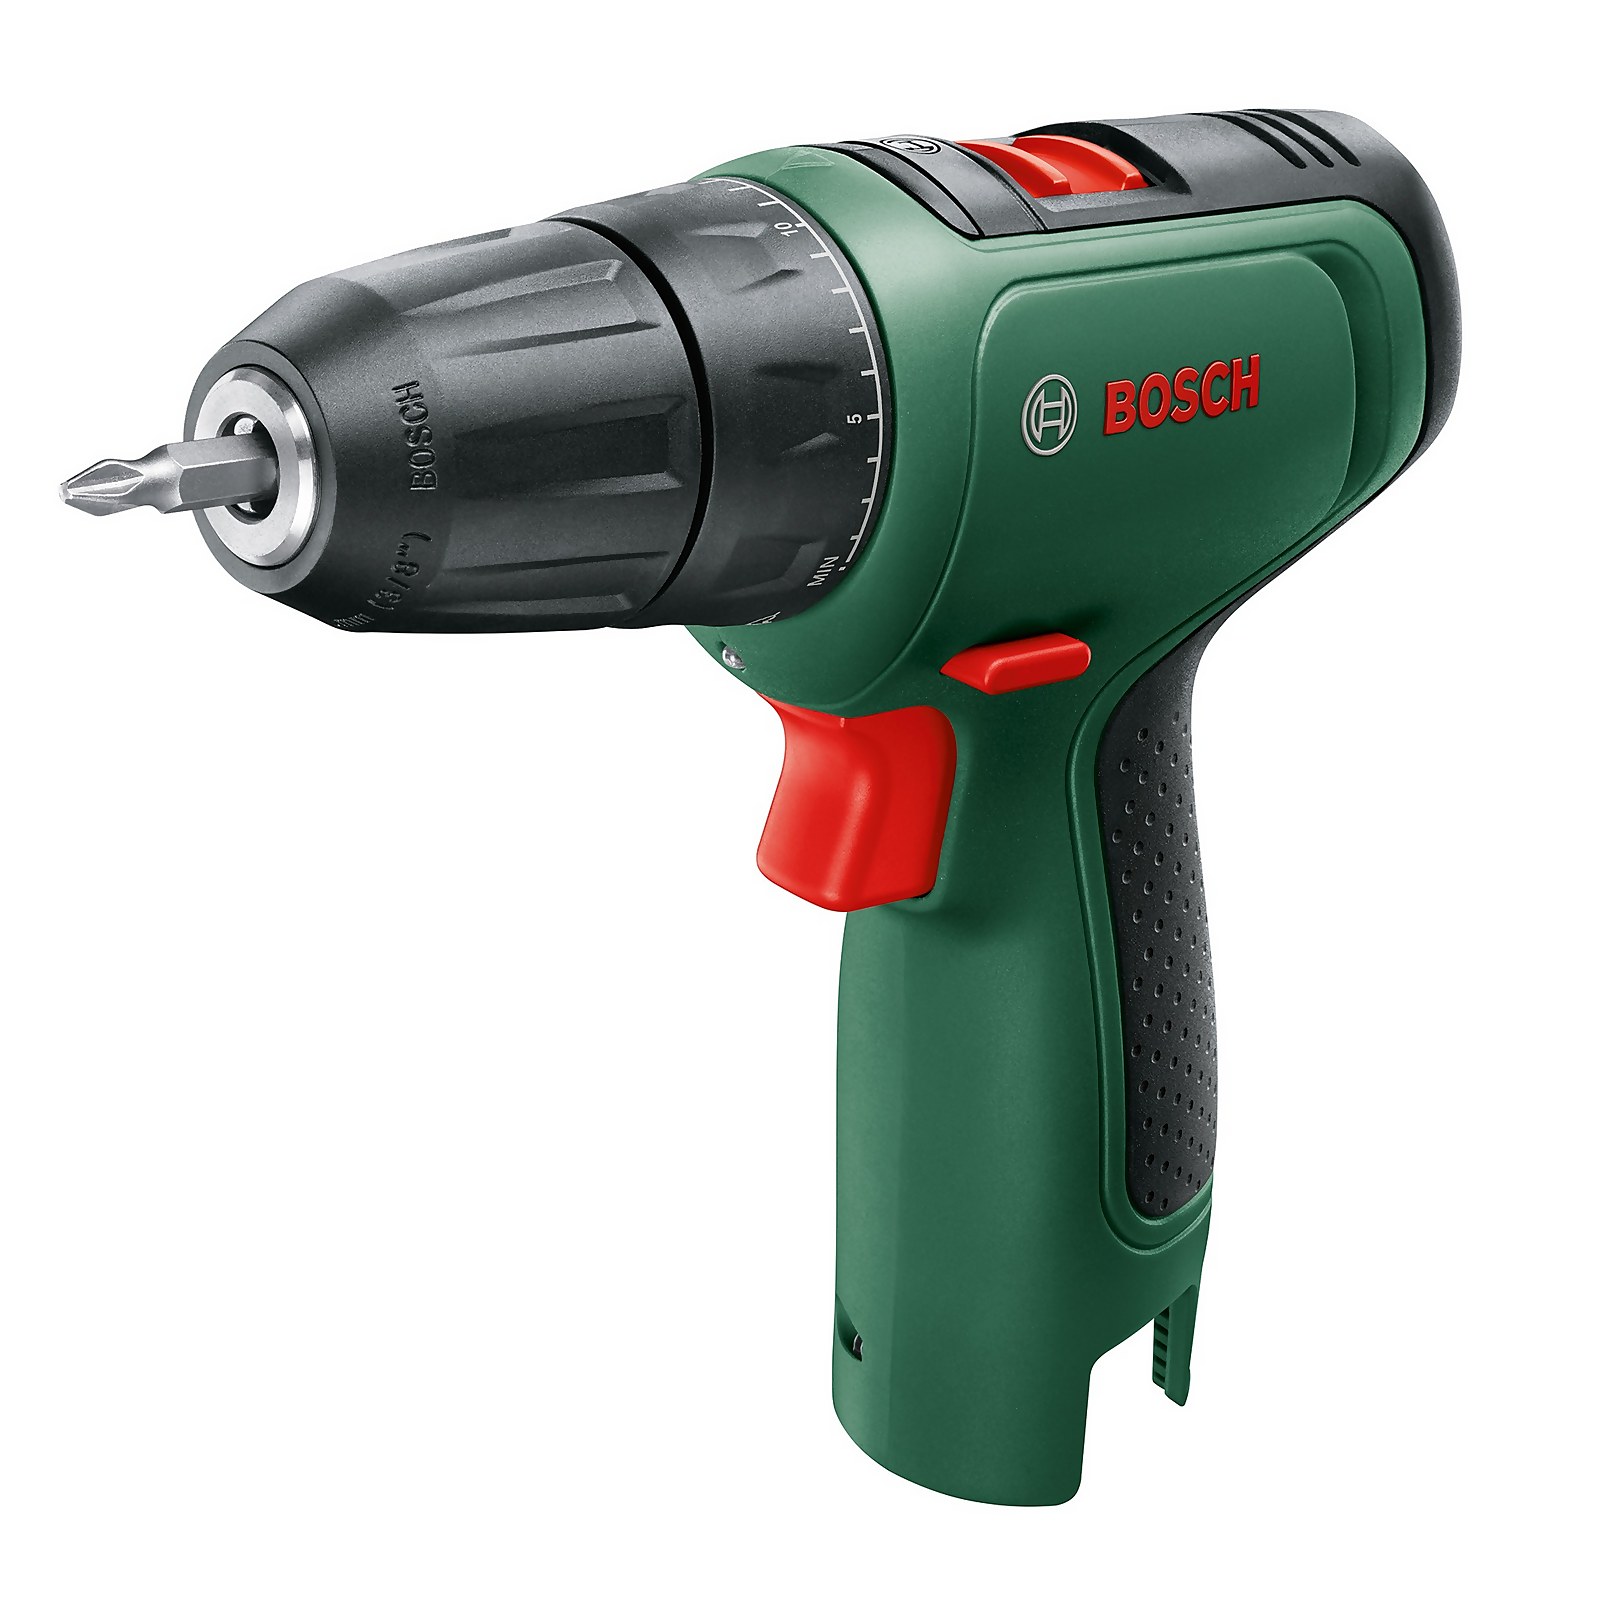 Photo of Bosch Easydrill 1200 -no Battery Included-